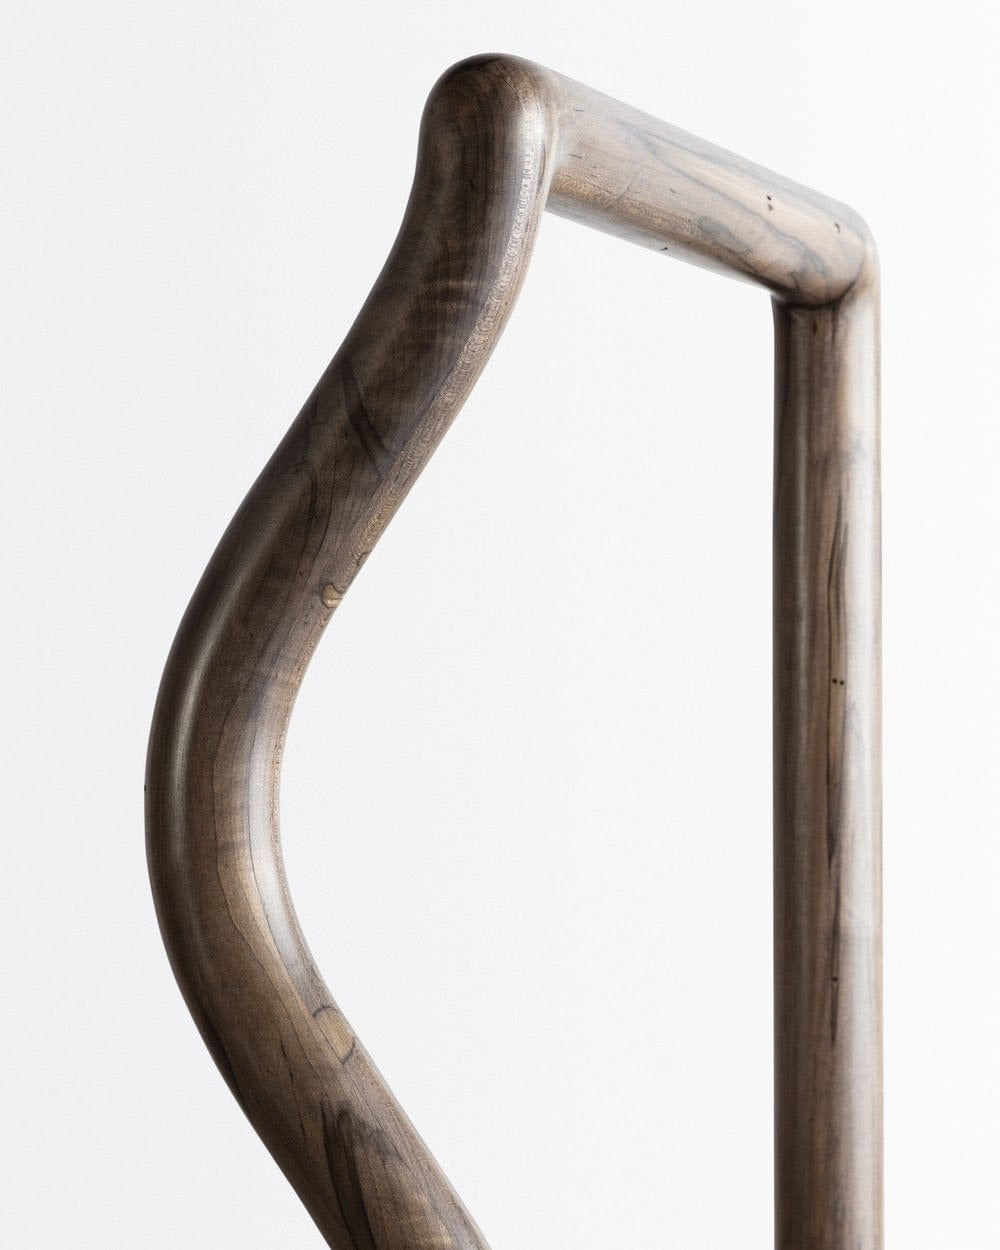 Squiggle Chair in Oxidized Maple Chairs